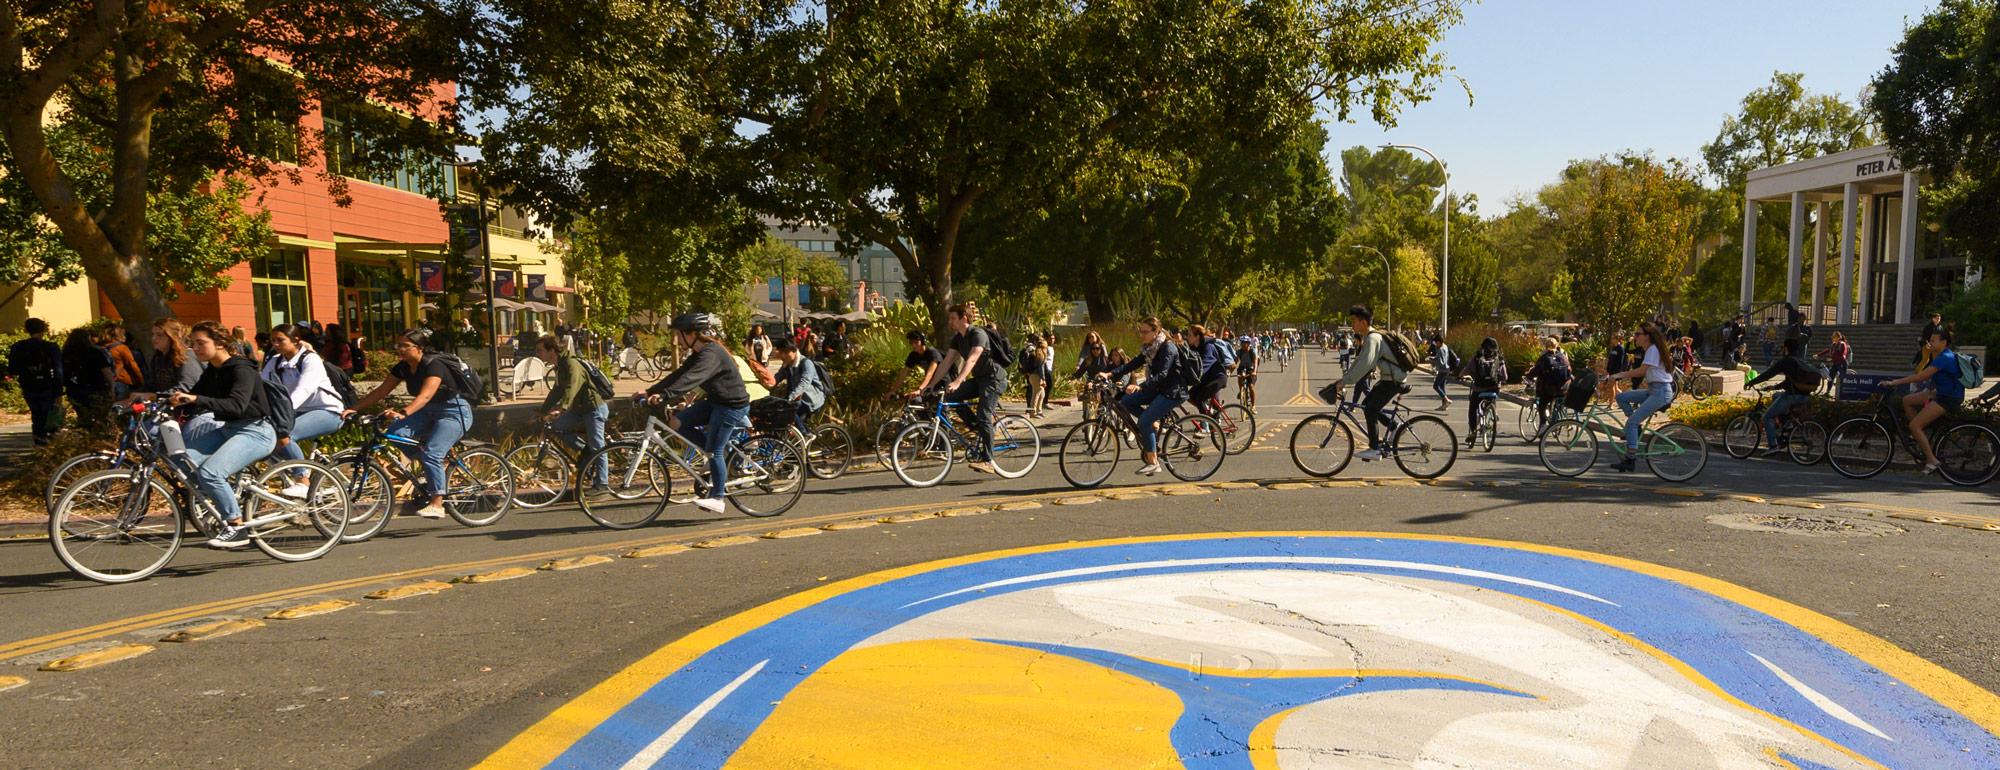 students riding on bicycles around the bike circle